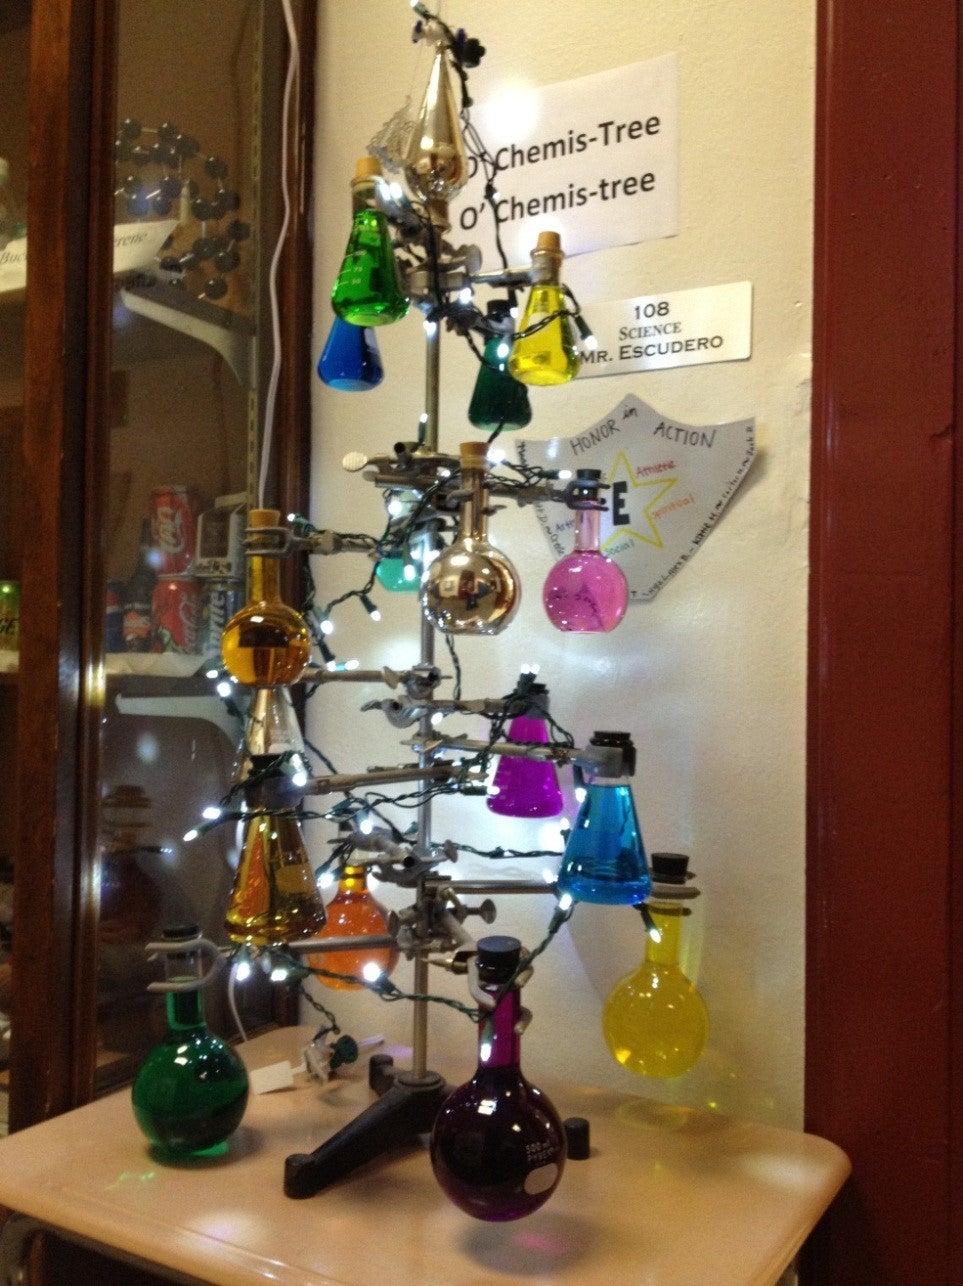 Christmas tree made from retort stand, clamps, and flasks.